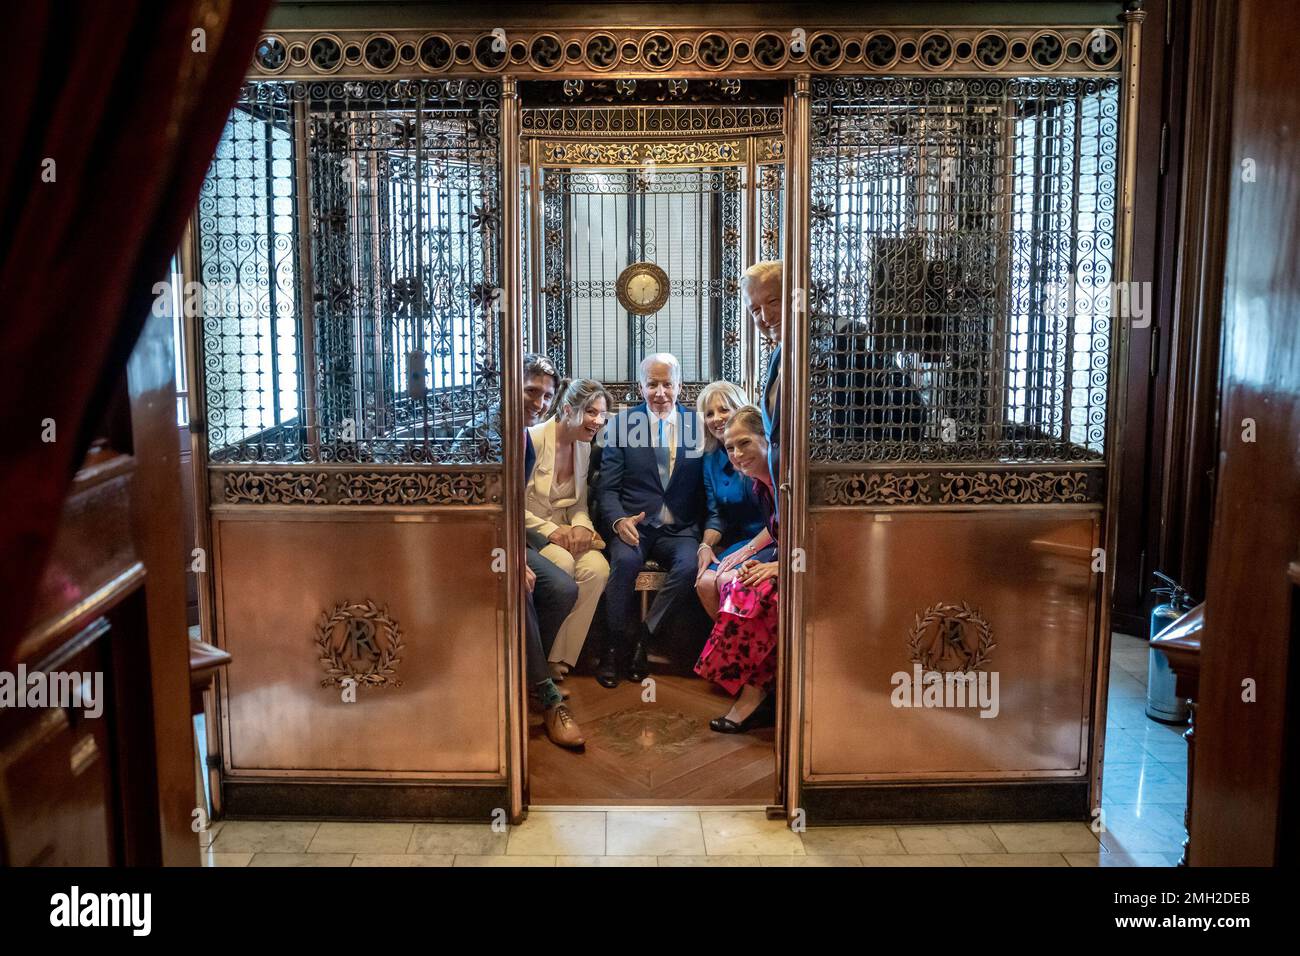 President Joe Biden, First Lady Jill Biden, Mexican President Andres Manuel Lopez Obrador, his wife Dr. Beatriz Gutiérrez Müller, Canadian Prime Minister Justin Trudeau and his wife Sophie Gregoire Trudeau pose for a photo in the elevator at the National Palace, Tuesday, January 10, 2023, in Mexico City. (Official White House Photo by Adam Schultz) Stock Photo